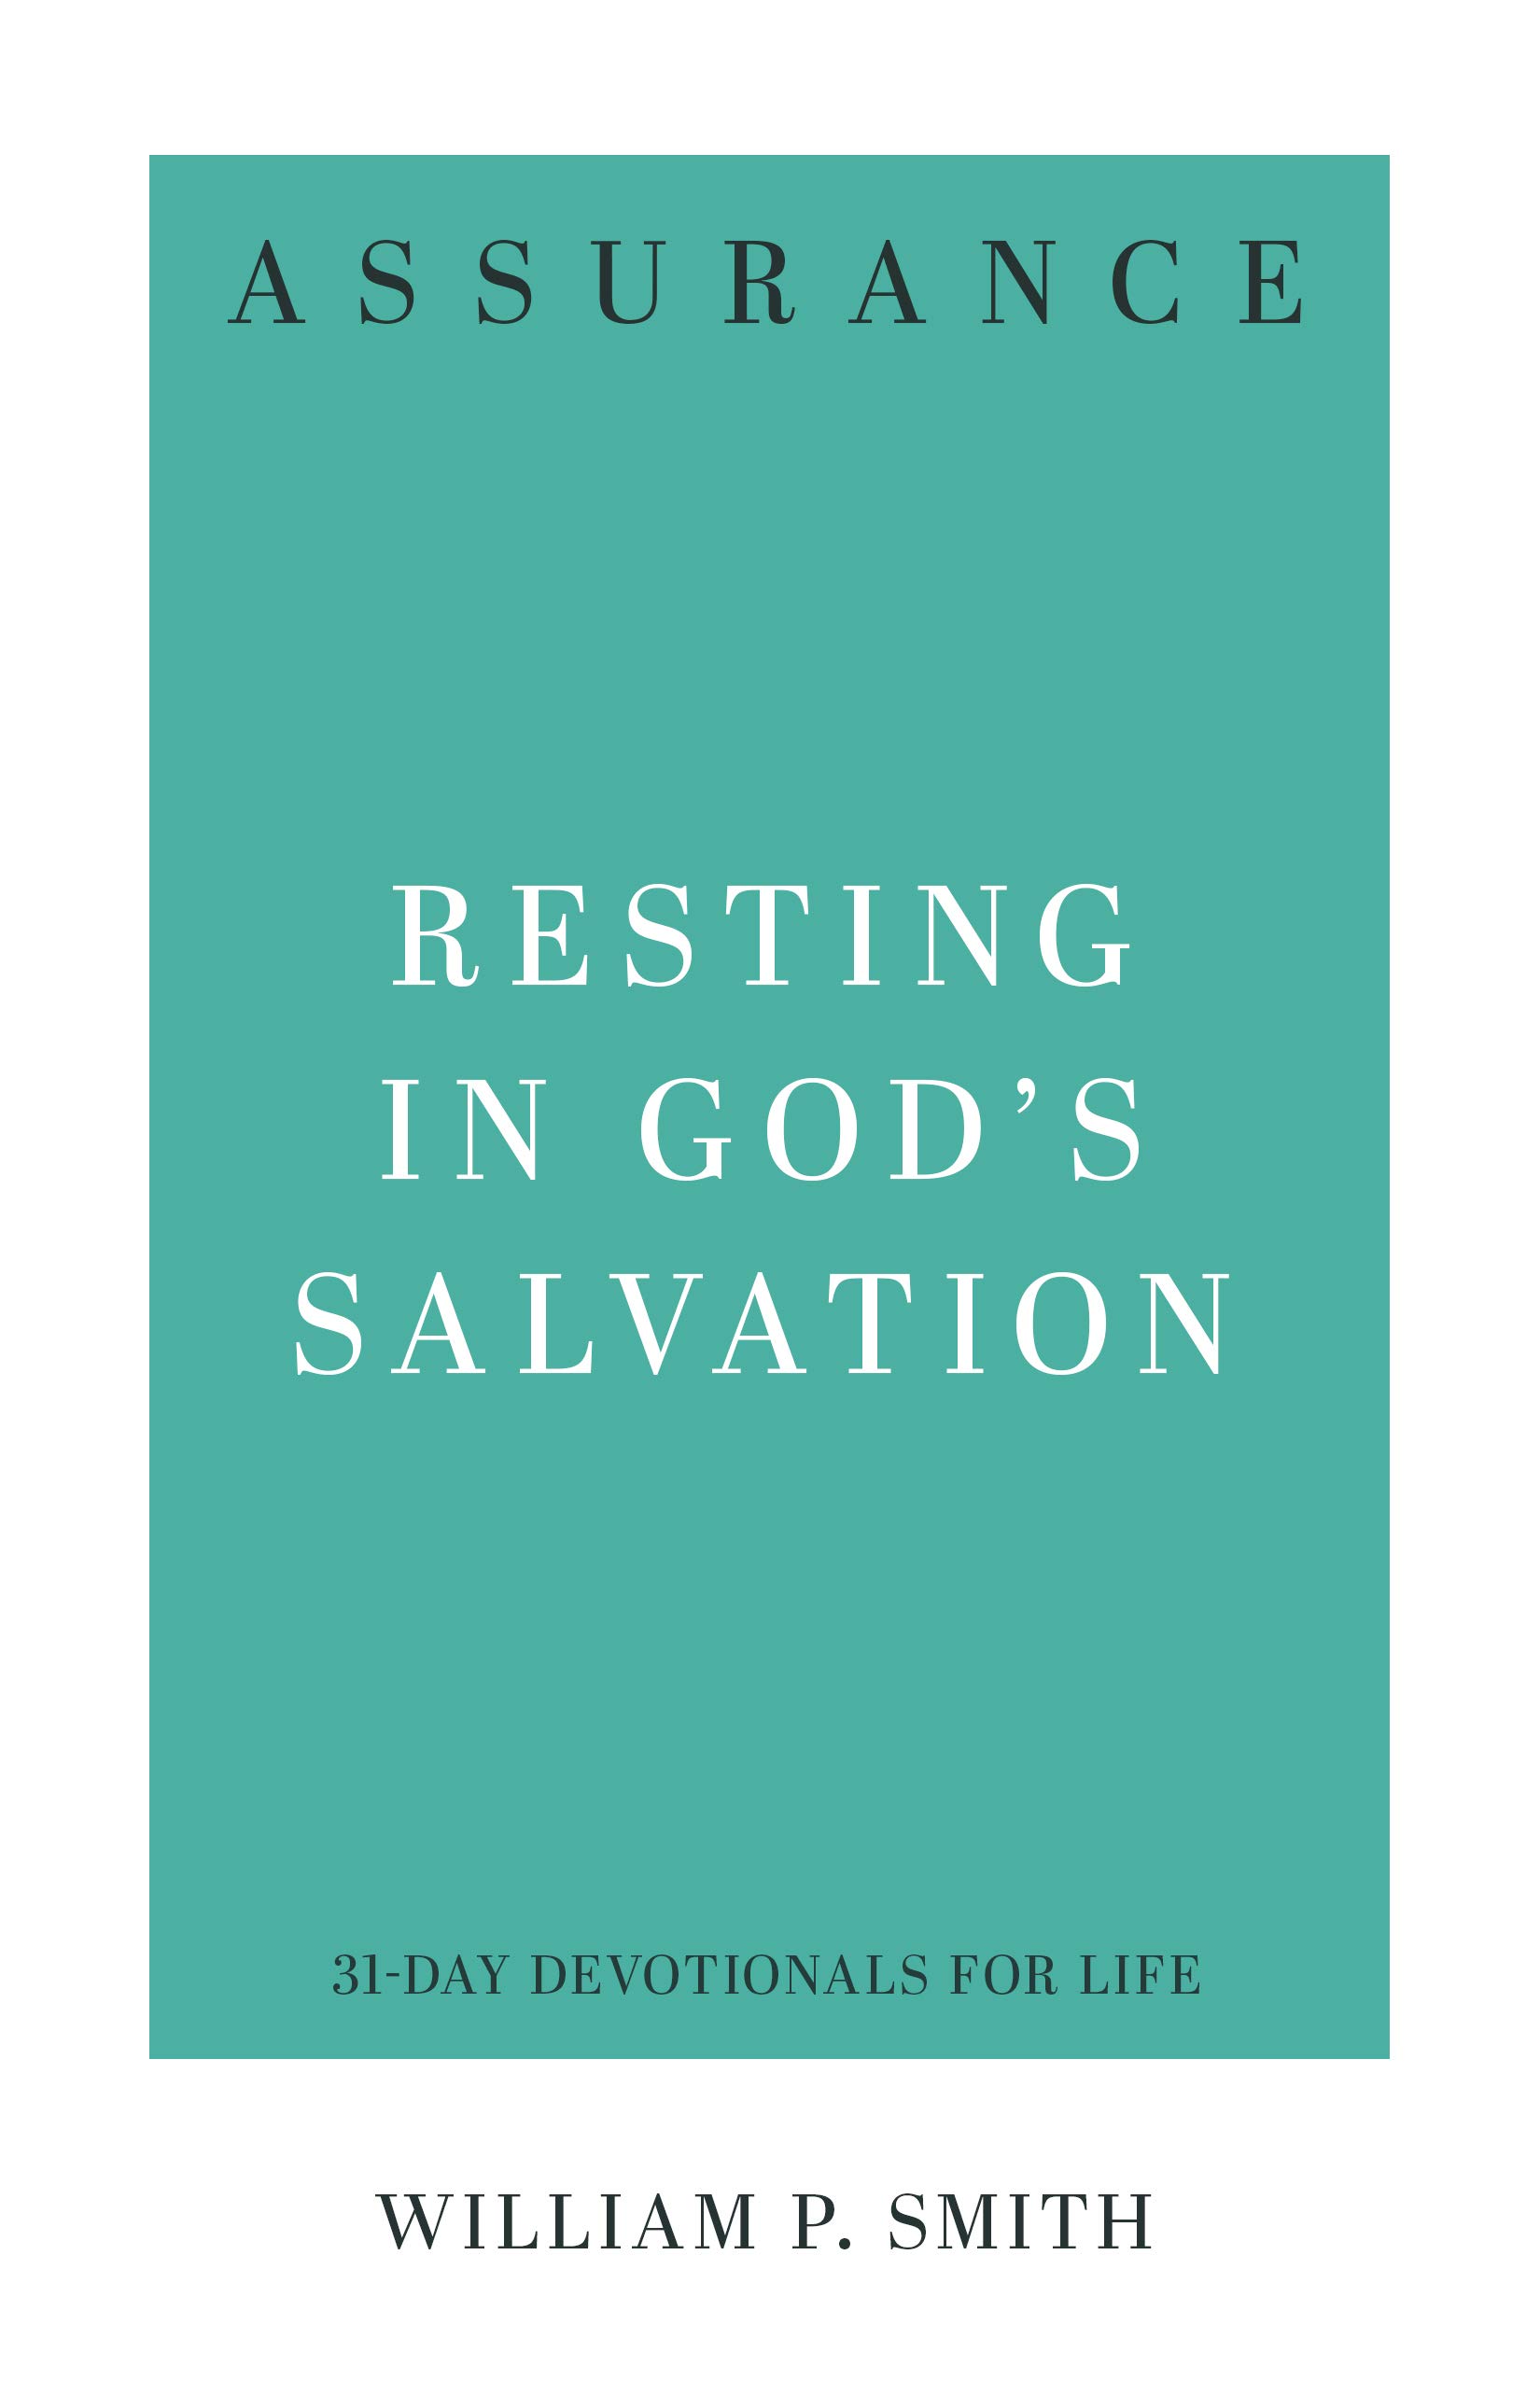 Book Notice: ASSURANCE: RESTING IN GOD’S SALVATION (31-DAY DEVOTIONALS FOR LIFE), by William P. Smith